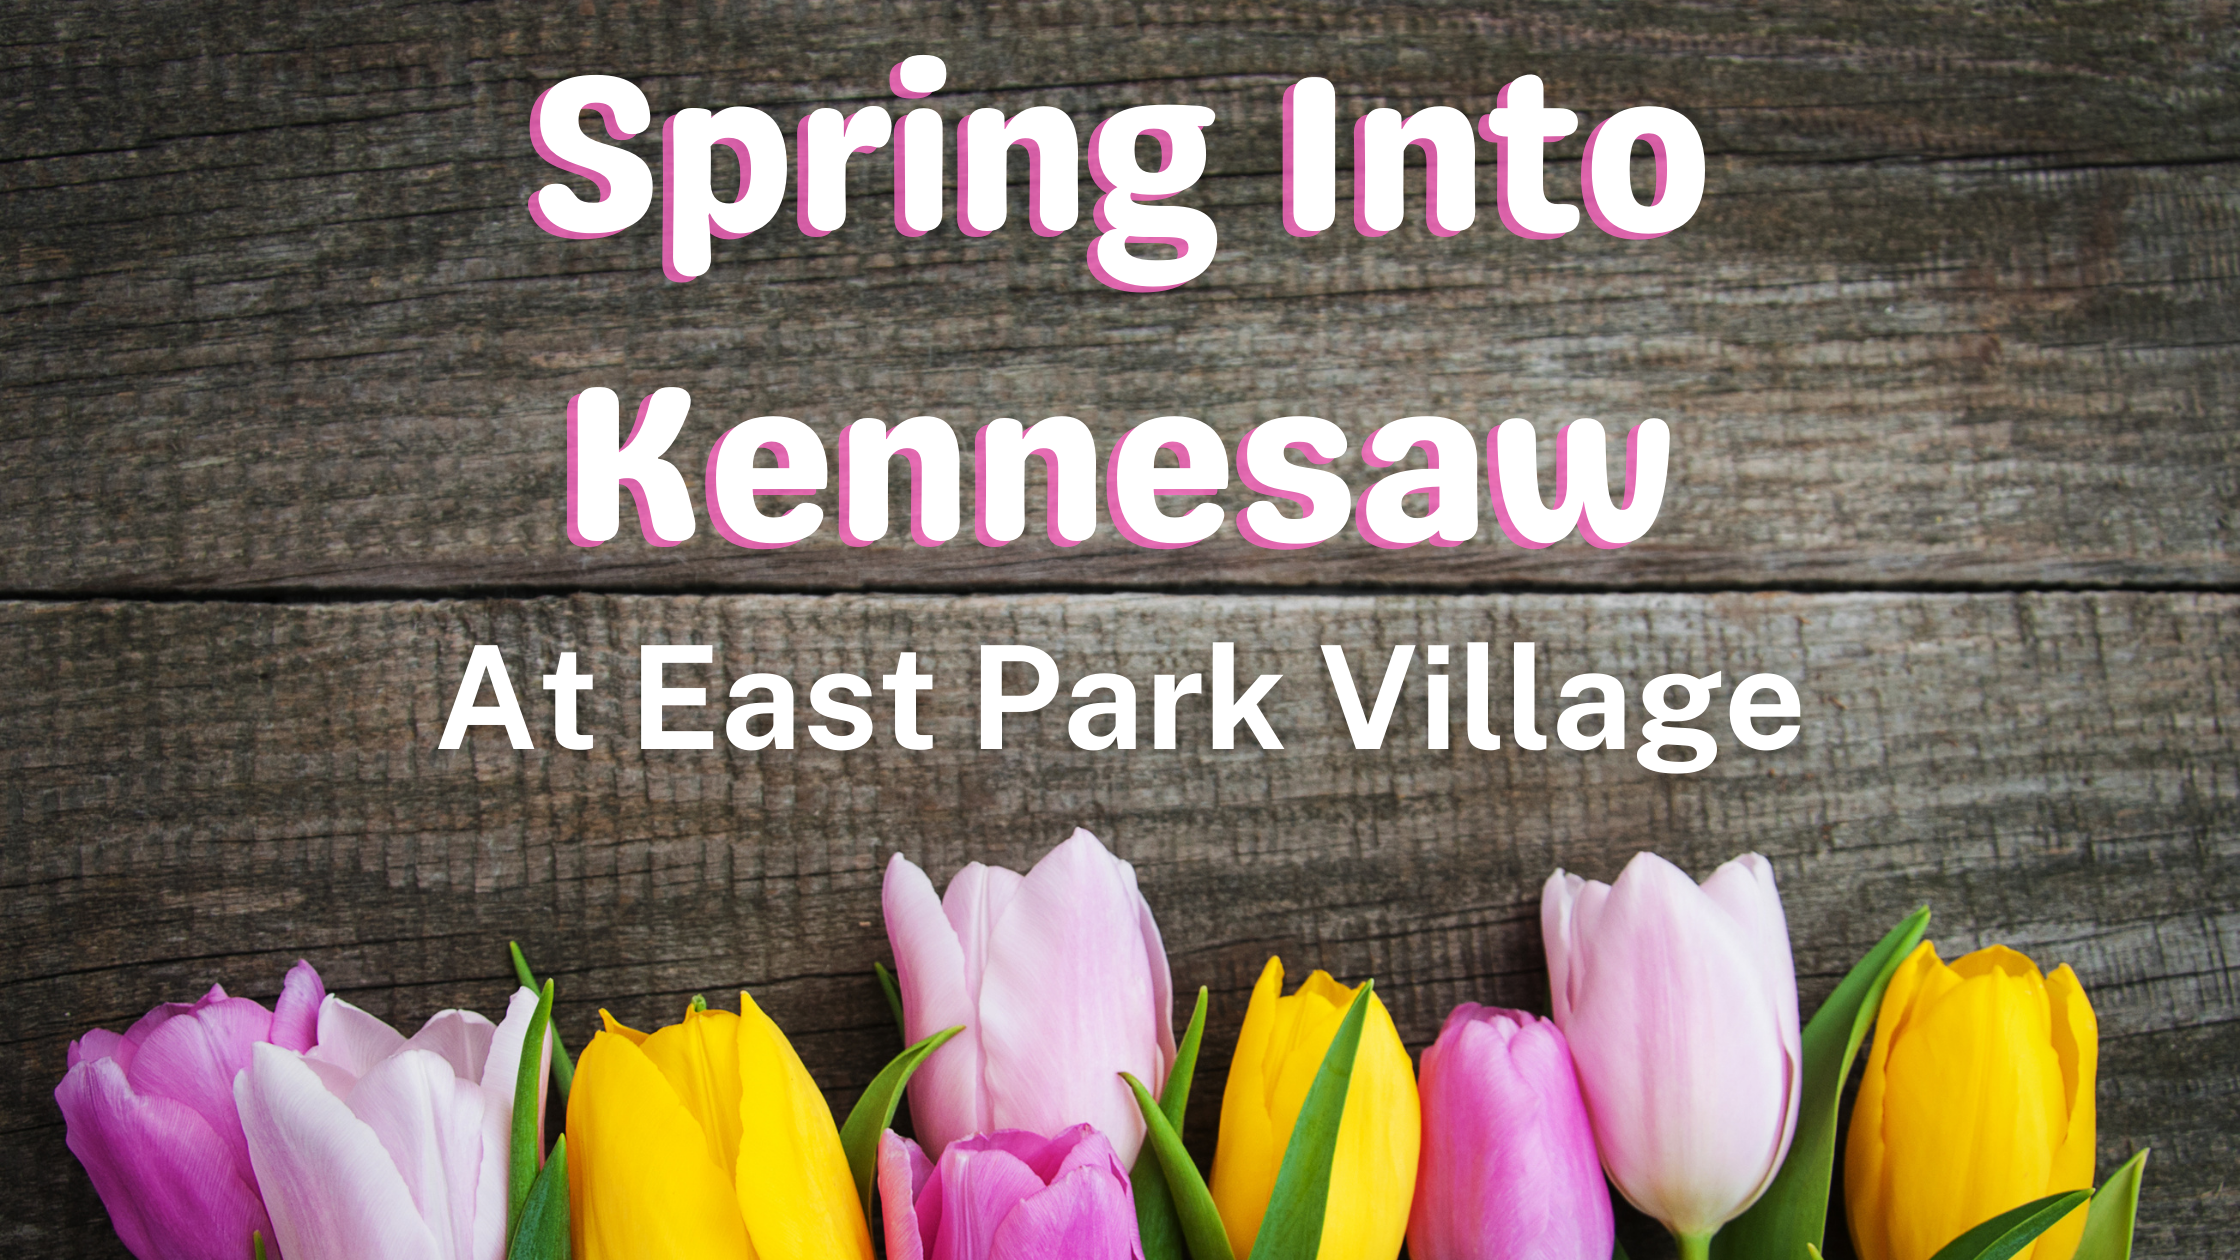 Spring Into Kennesaw At East Park Village